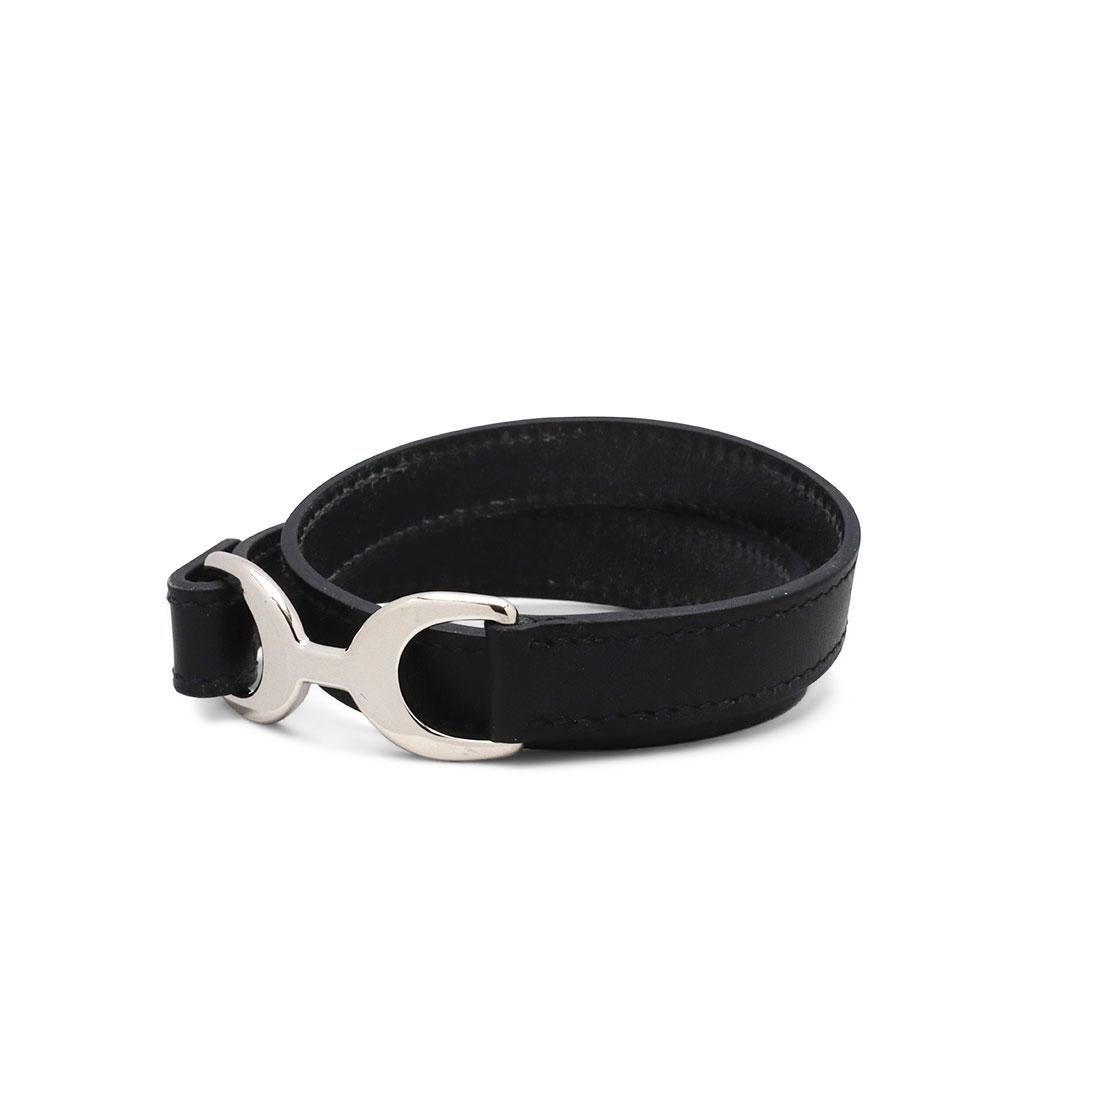 Authentic Hermès 'Pavane Double Tour' bracelet crafted in black leather. This classic bracelet is designed as a wrap around and detailed with perceptible stitching. It features a palladium plated buckle and can fit up to a size 7 inch wrist